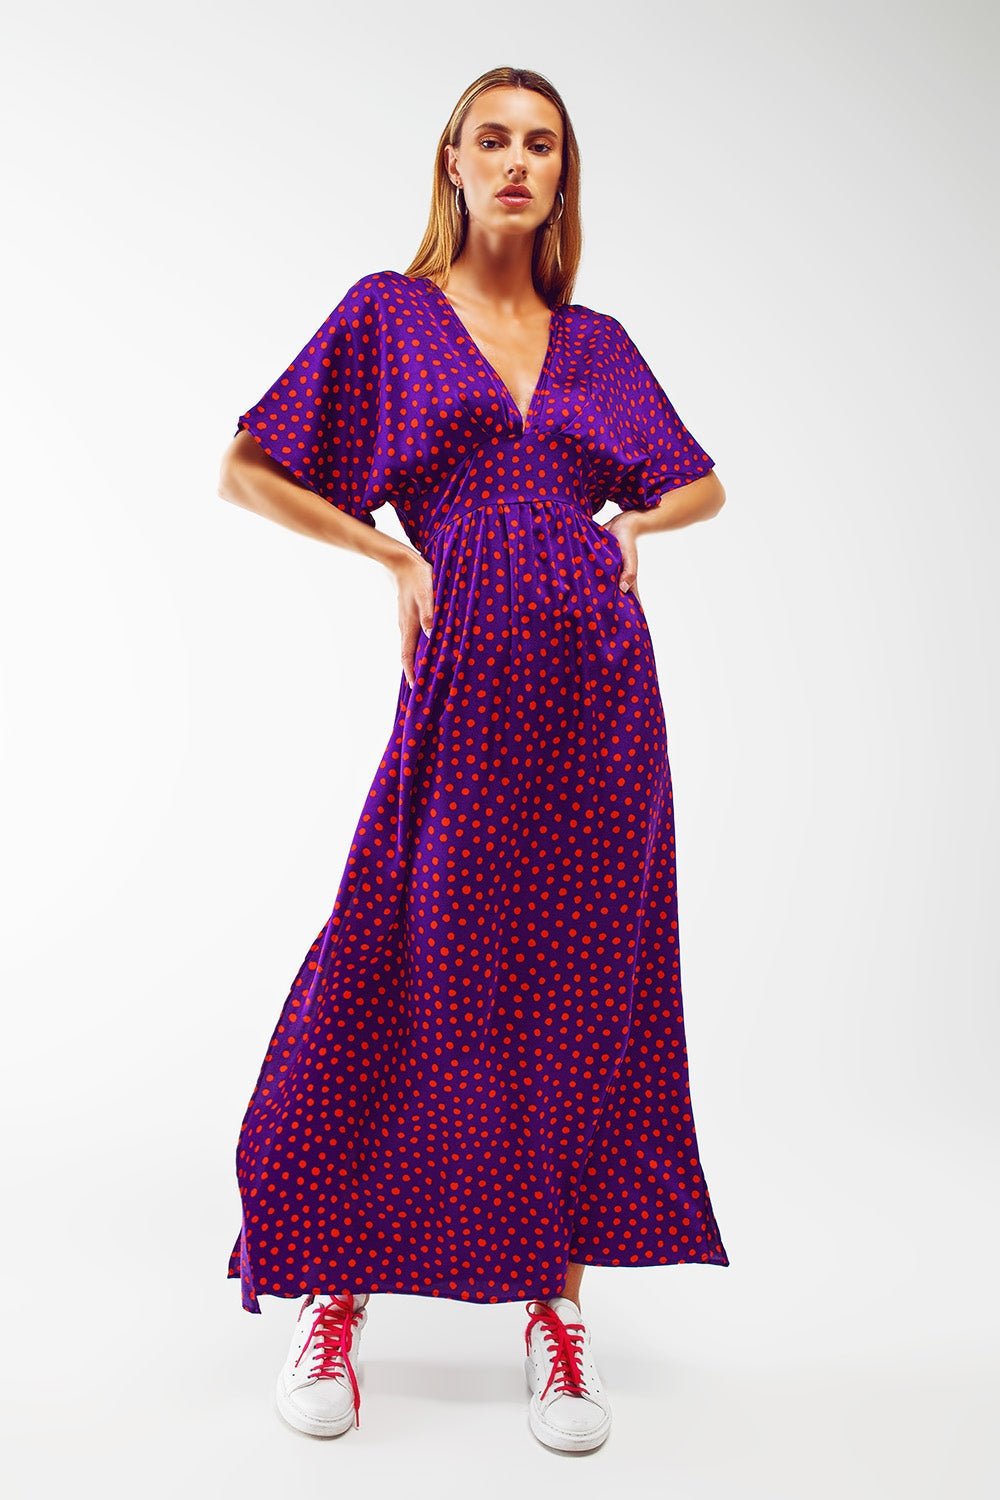 Maxi Cinched at the Waist Dress With Angel Sleeves in Purple Polka Dot - Mack & Harvie